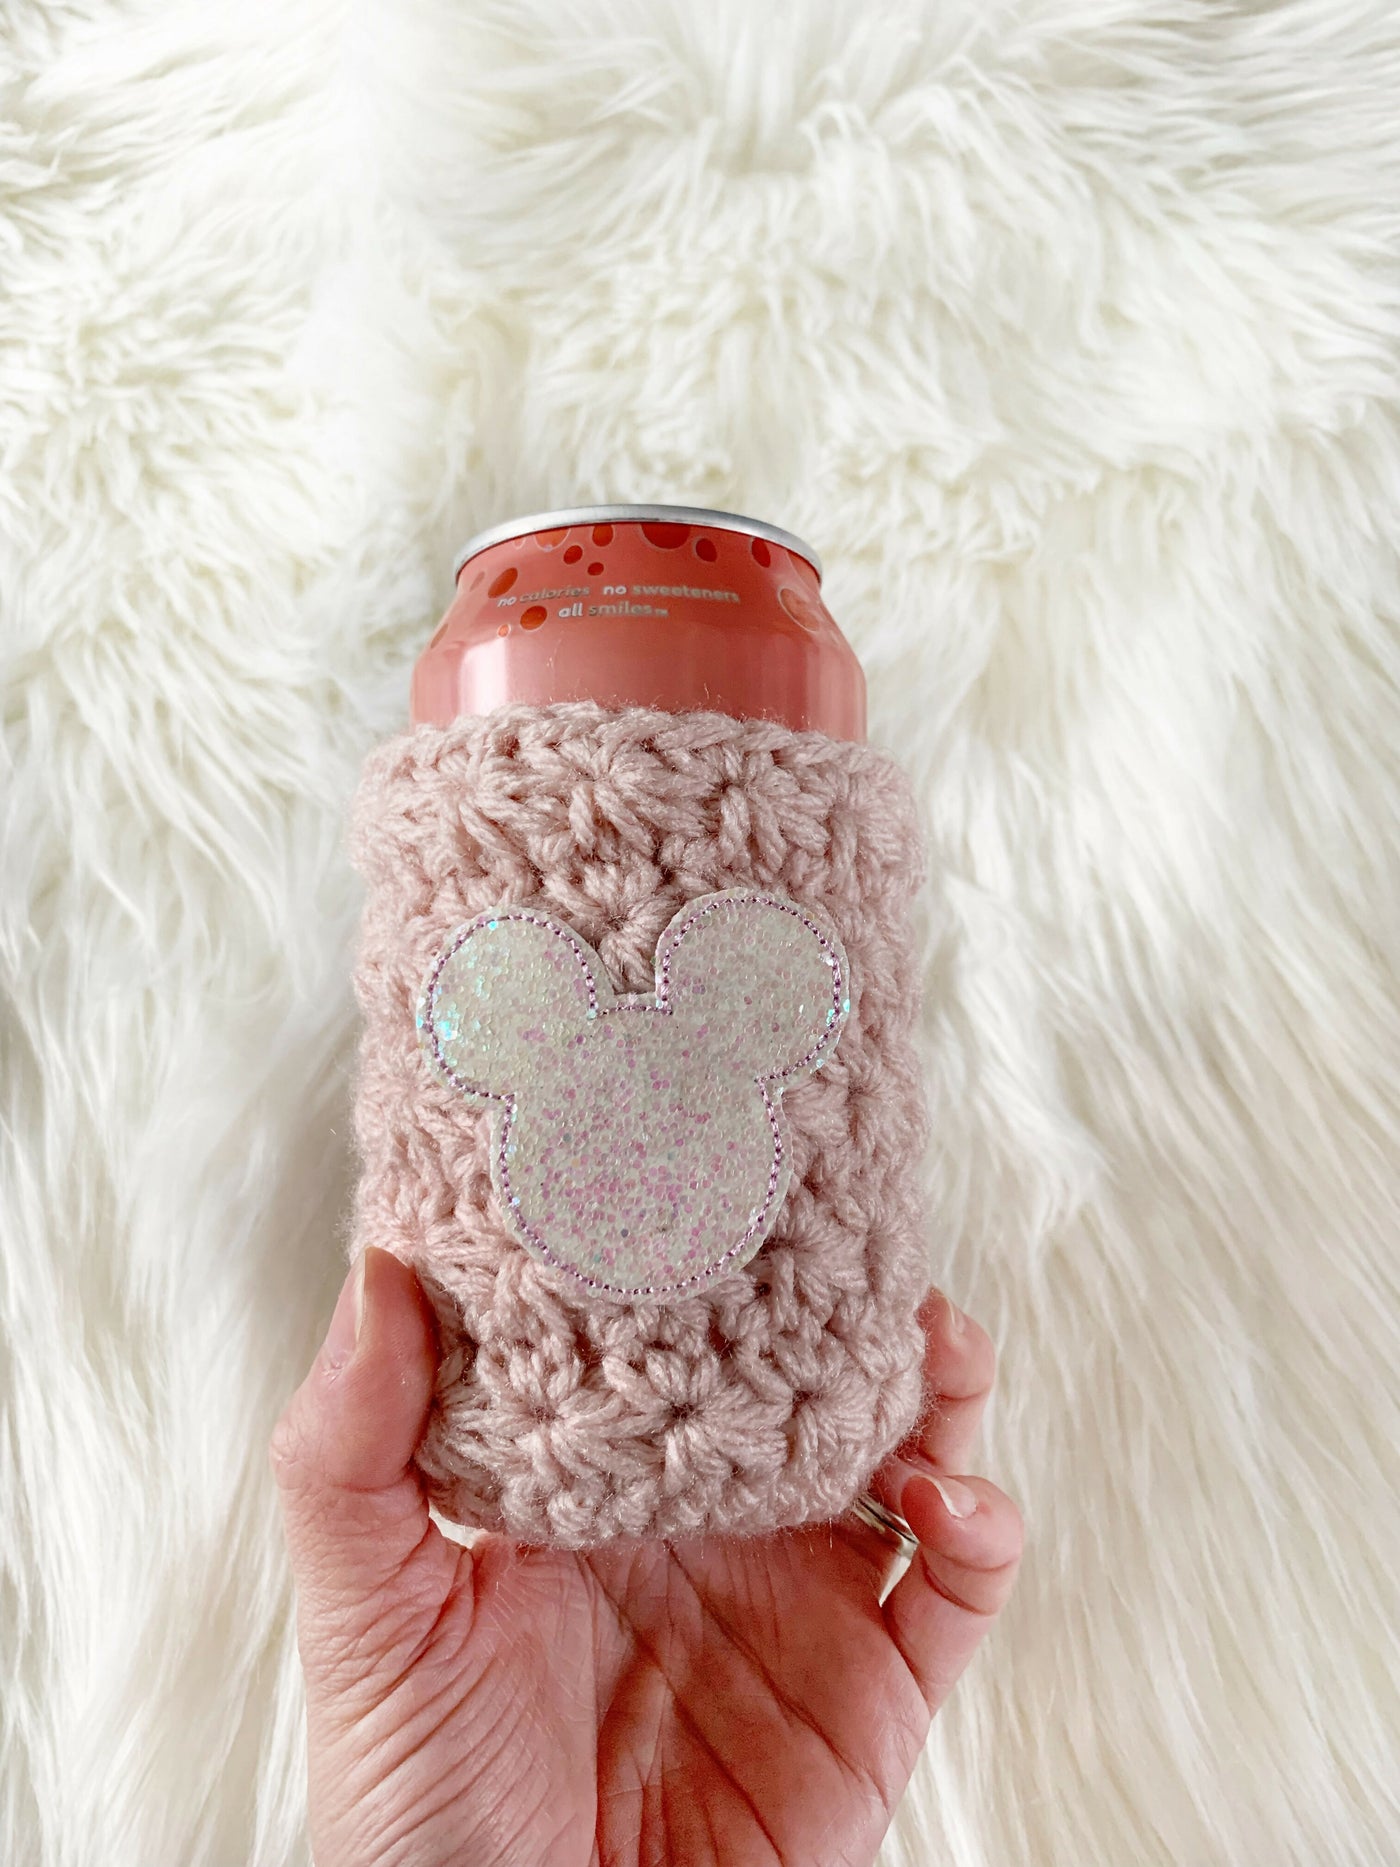 Glitter Mouse Crochet Can Cozy